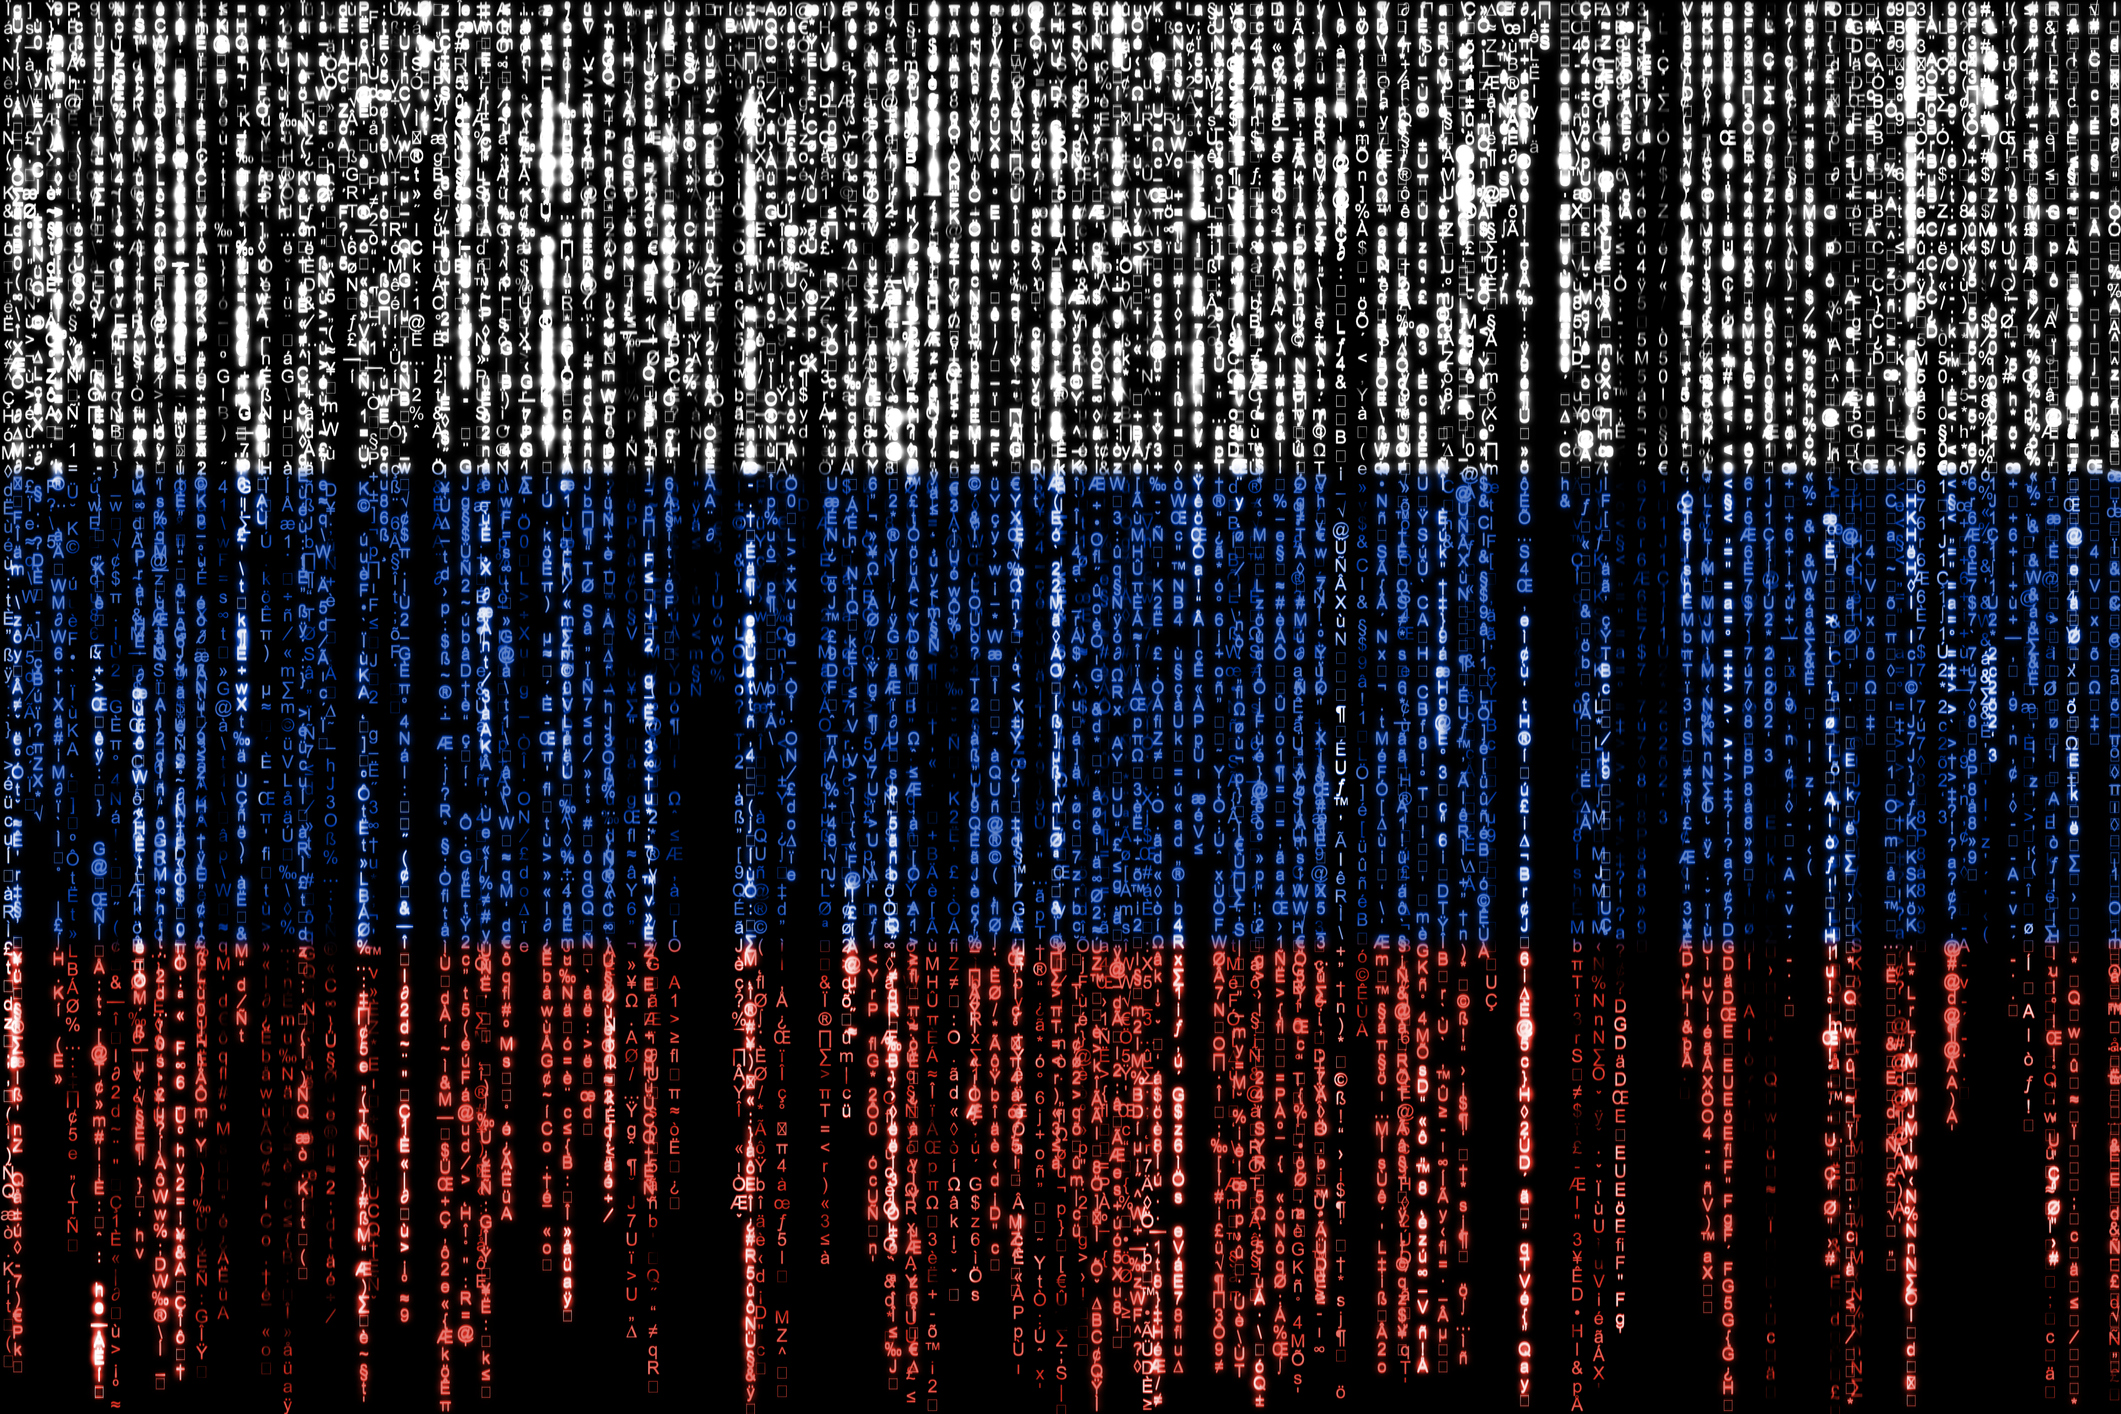 Russia Creates Its Own Certificate Authority (CA) to Issue TLS Certificates